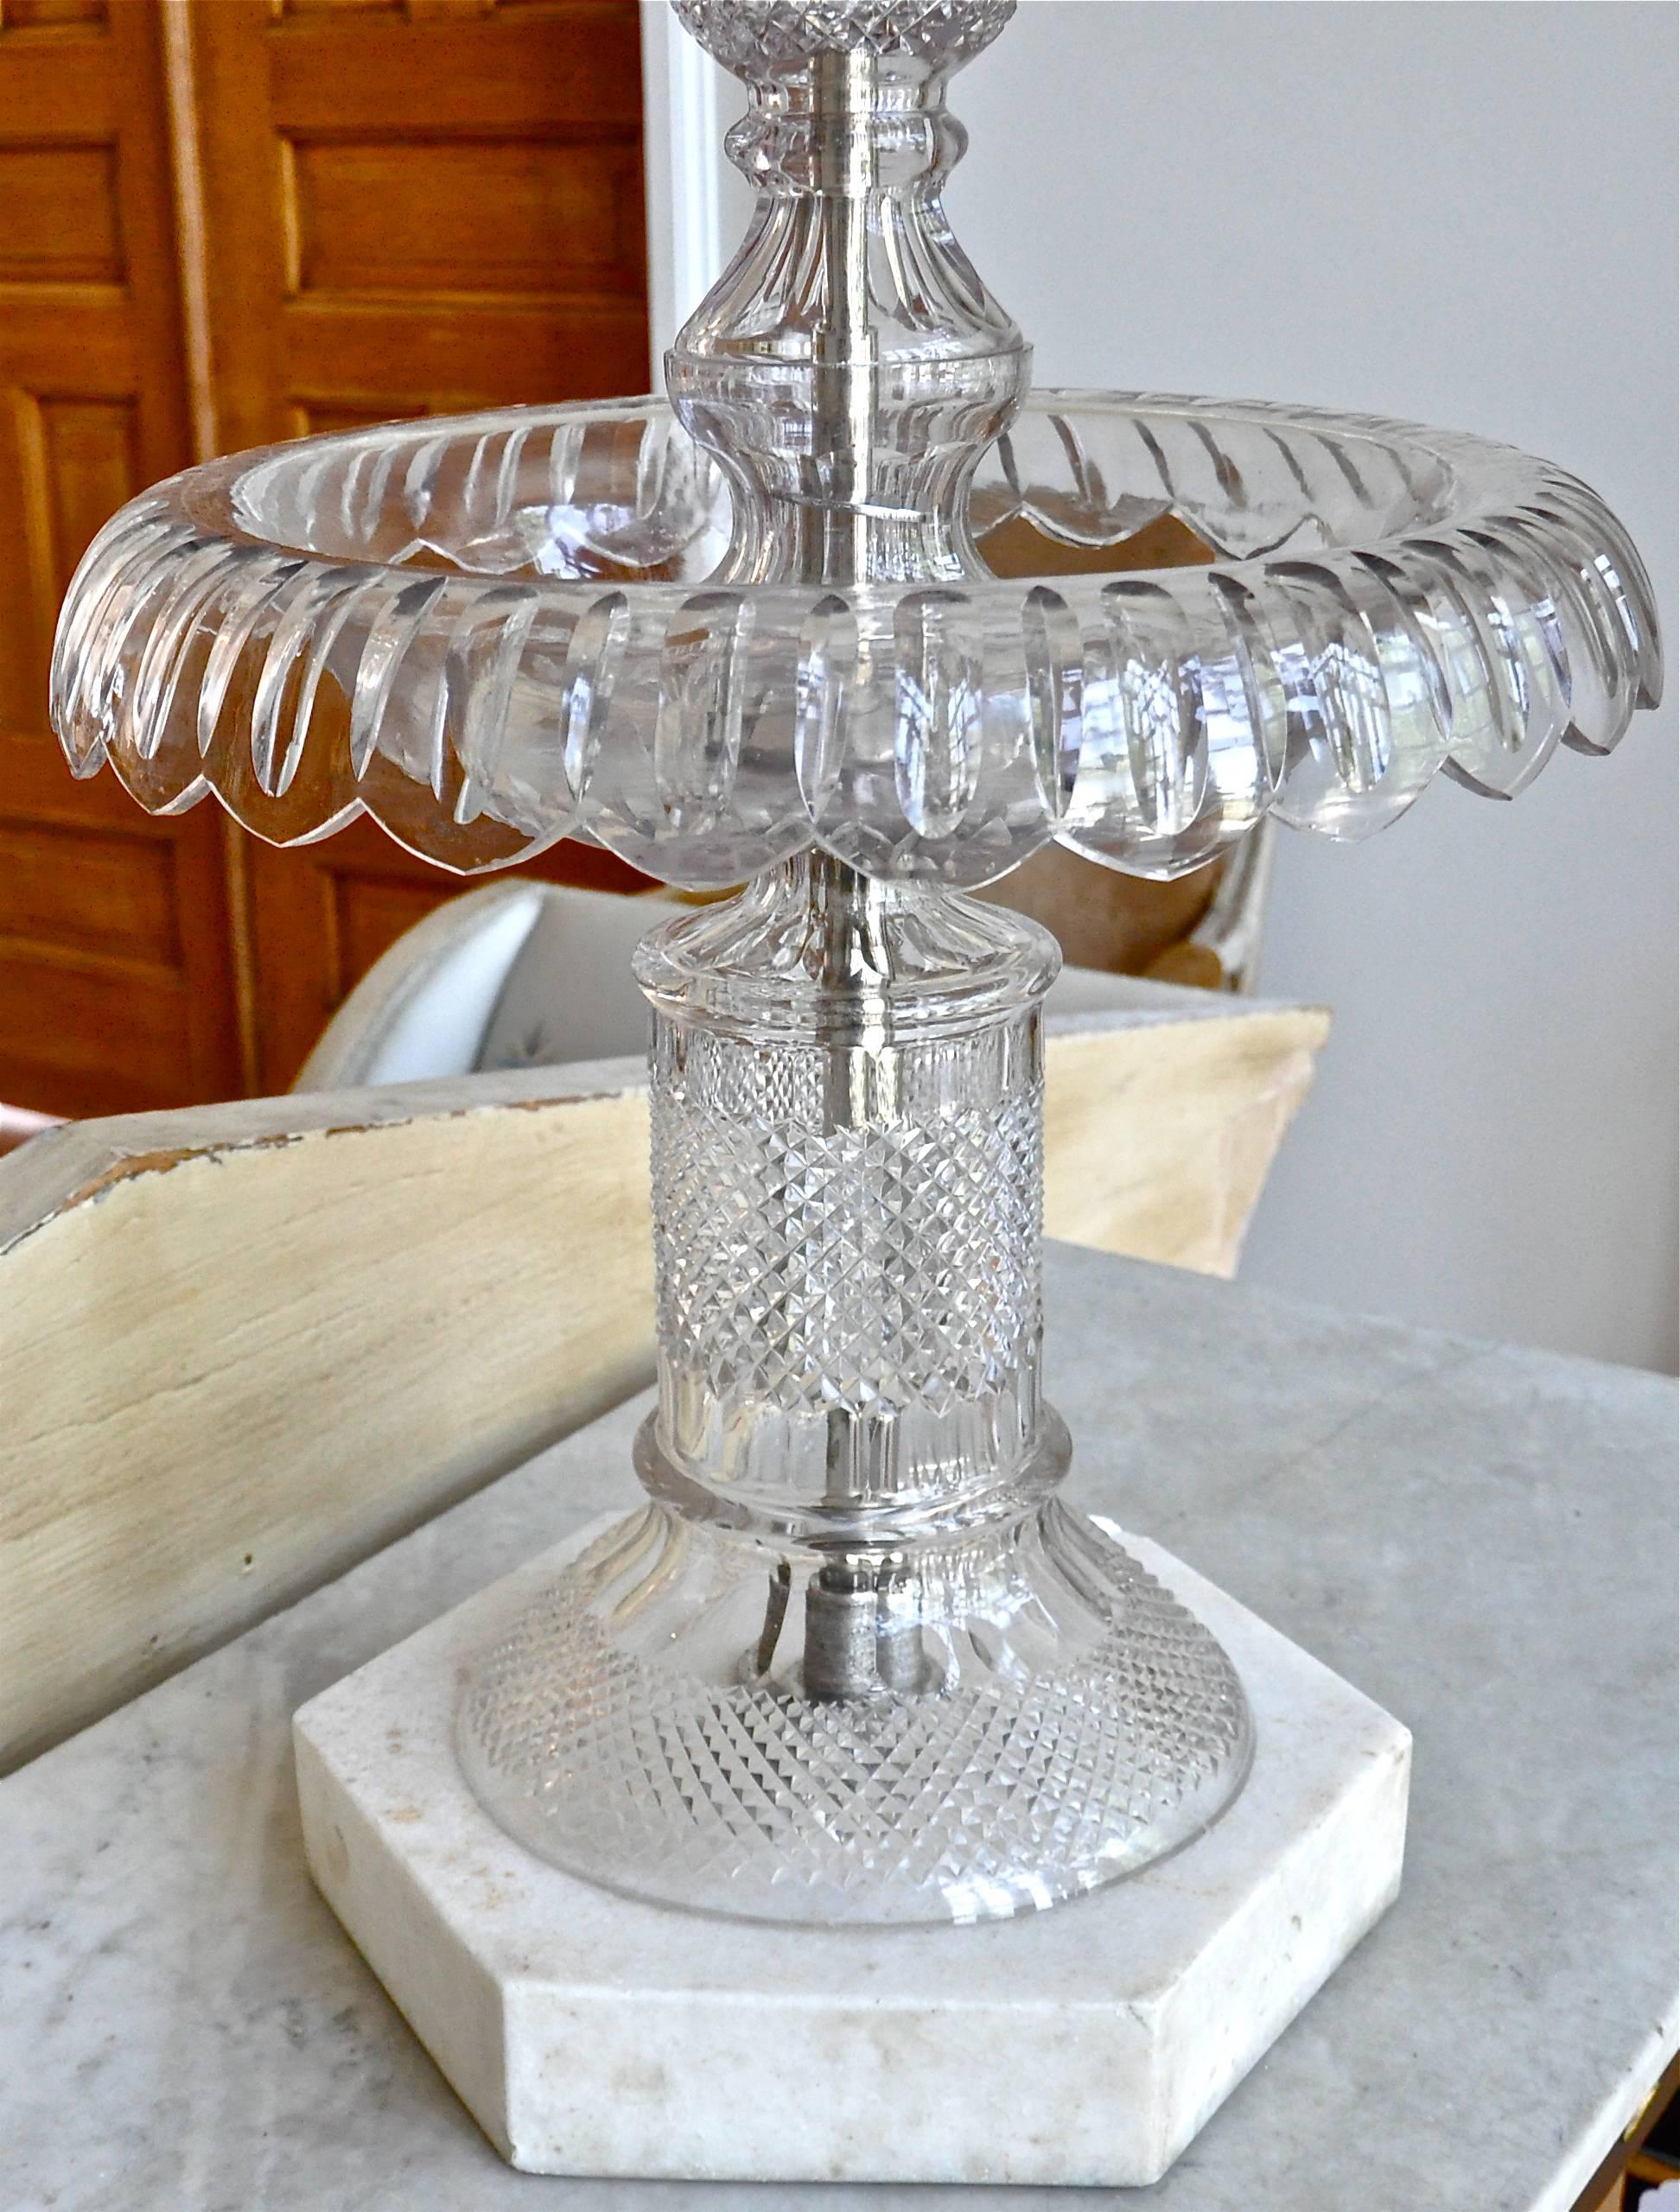 Rare and monumental crystal table fountain attributed to baccarat

Three-tiers of blown and cut crystal, signature Baccarat-style diamond cut
Marble base
Can be used as an epergne however, was most probably a champagne fountain
A 